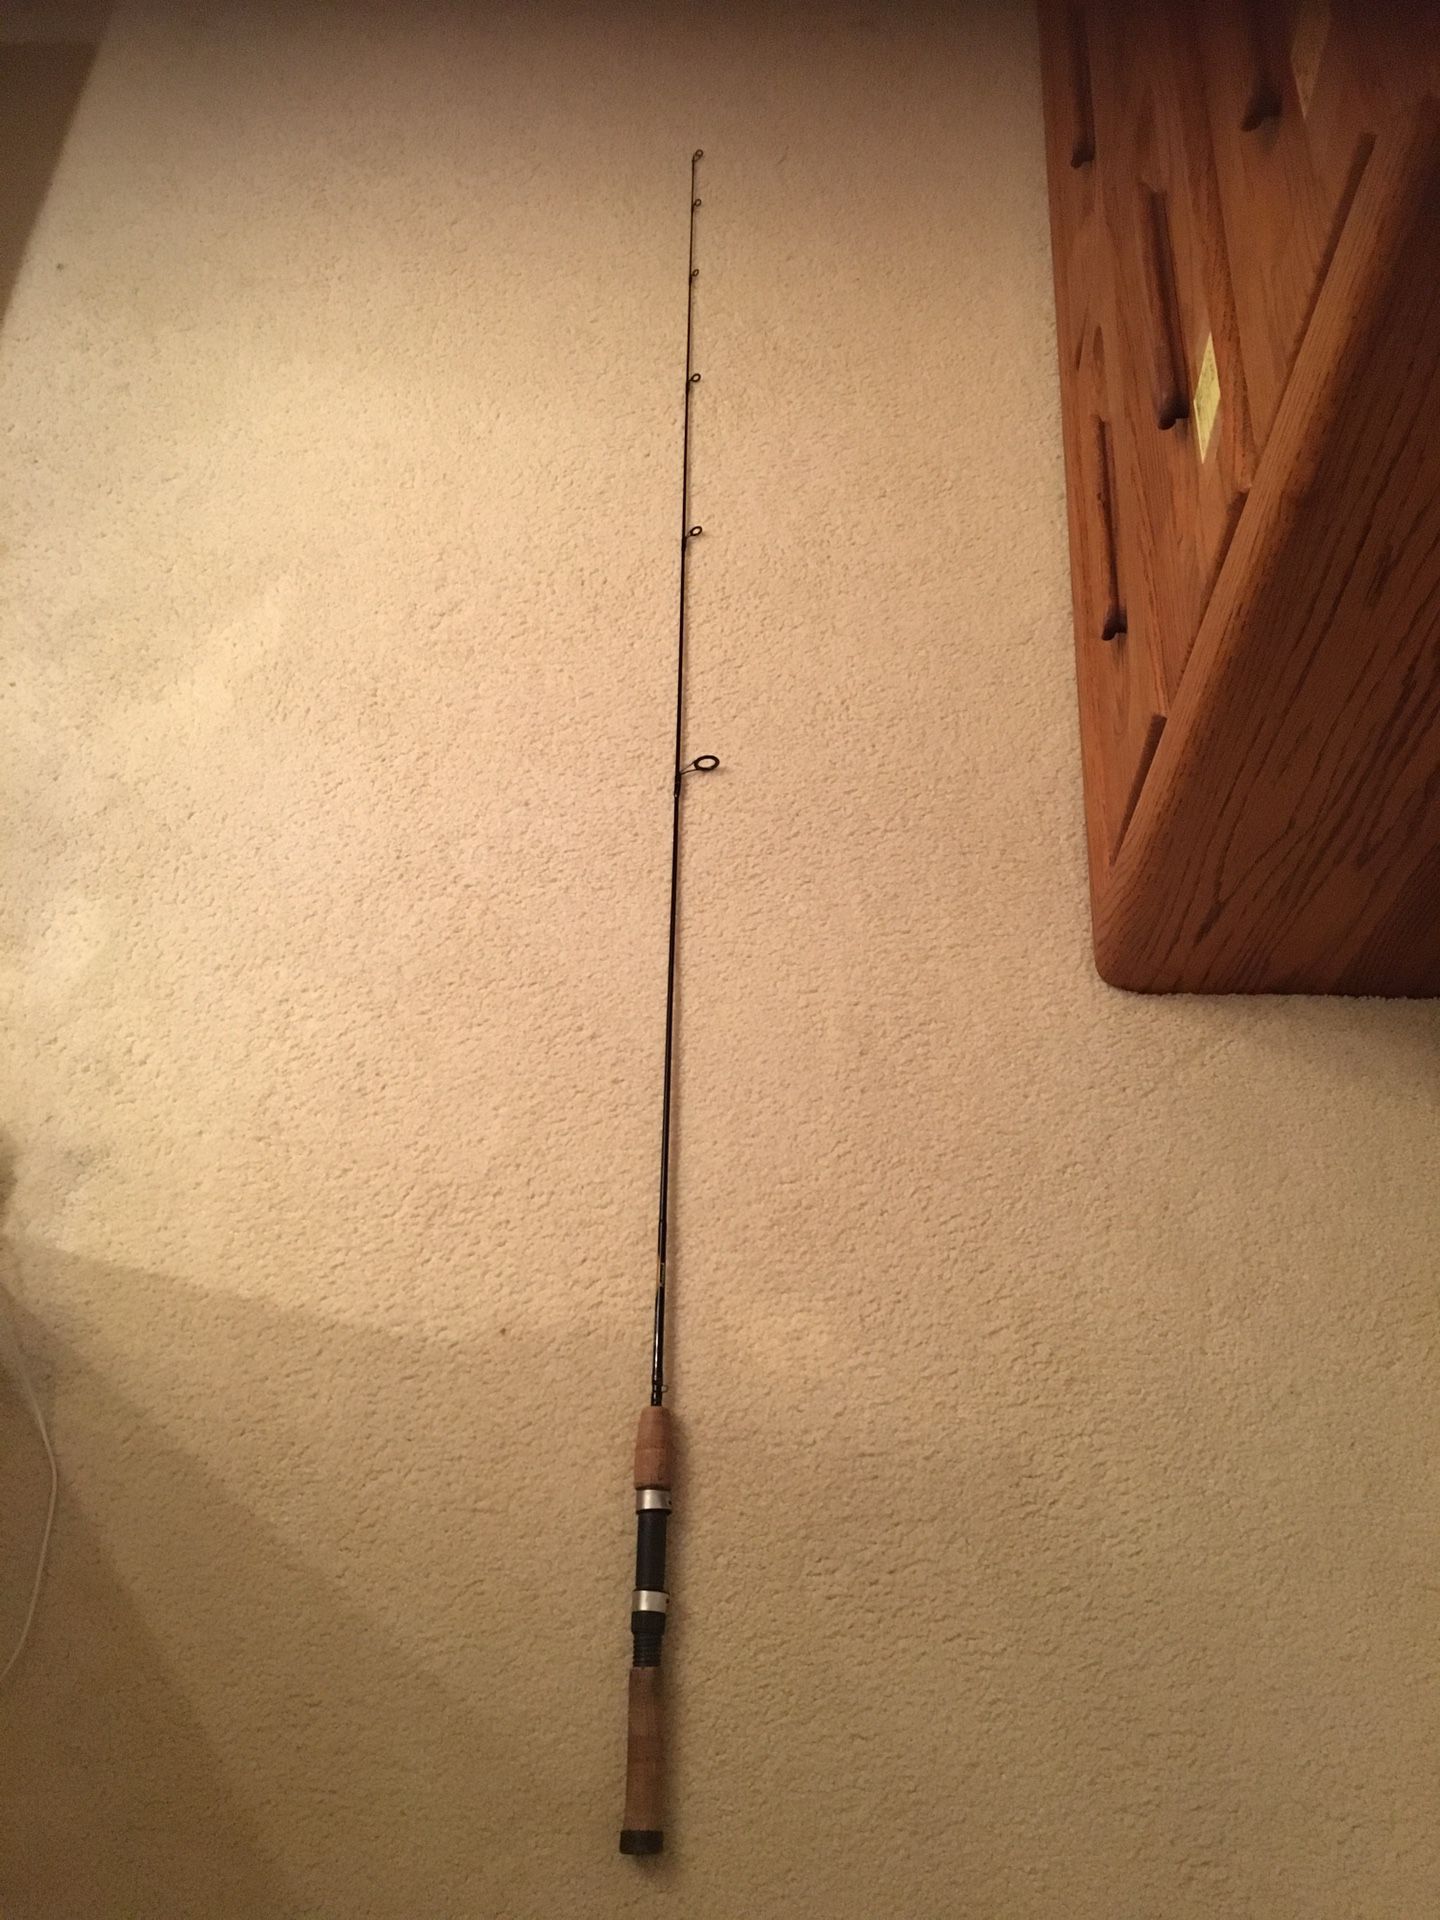 St. Croix Ultra Light Fishing Rod 5ft for Sale in Issaquah, WA - OfferUp